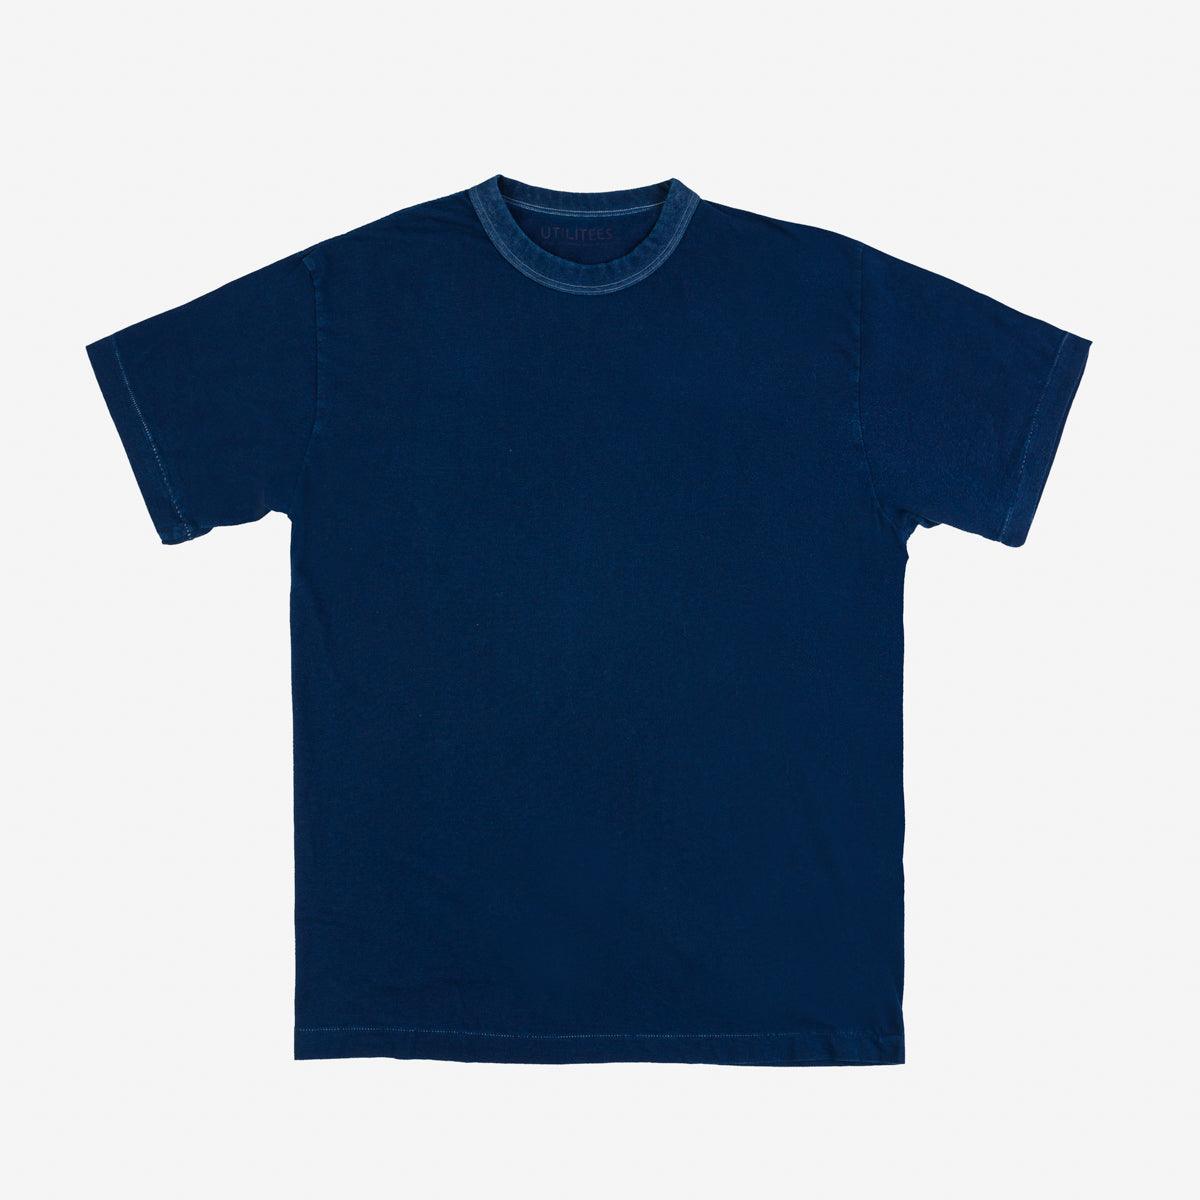 Image showing the UTIL-PIND - UTILITEES - 5.5oz Loopwheel Crew Neck T-Shirt - Pure Indigo which is a T-Shirts described by the following info Released, T-Shirts, Tops, Utilitees and sold on the IRON HEART GERMANY online store